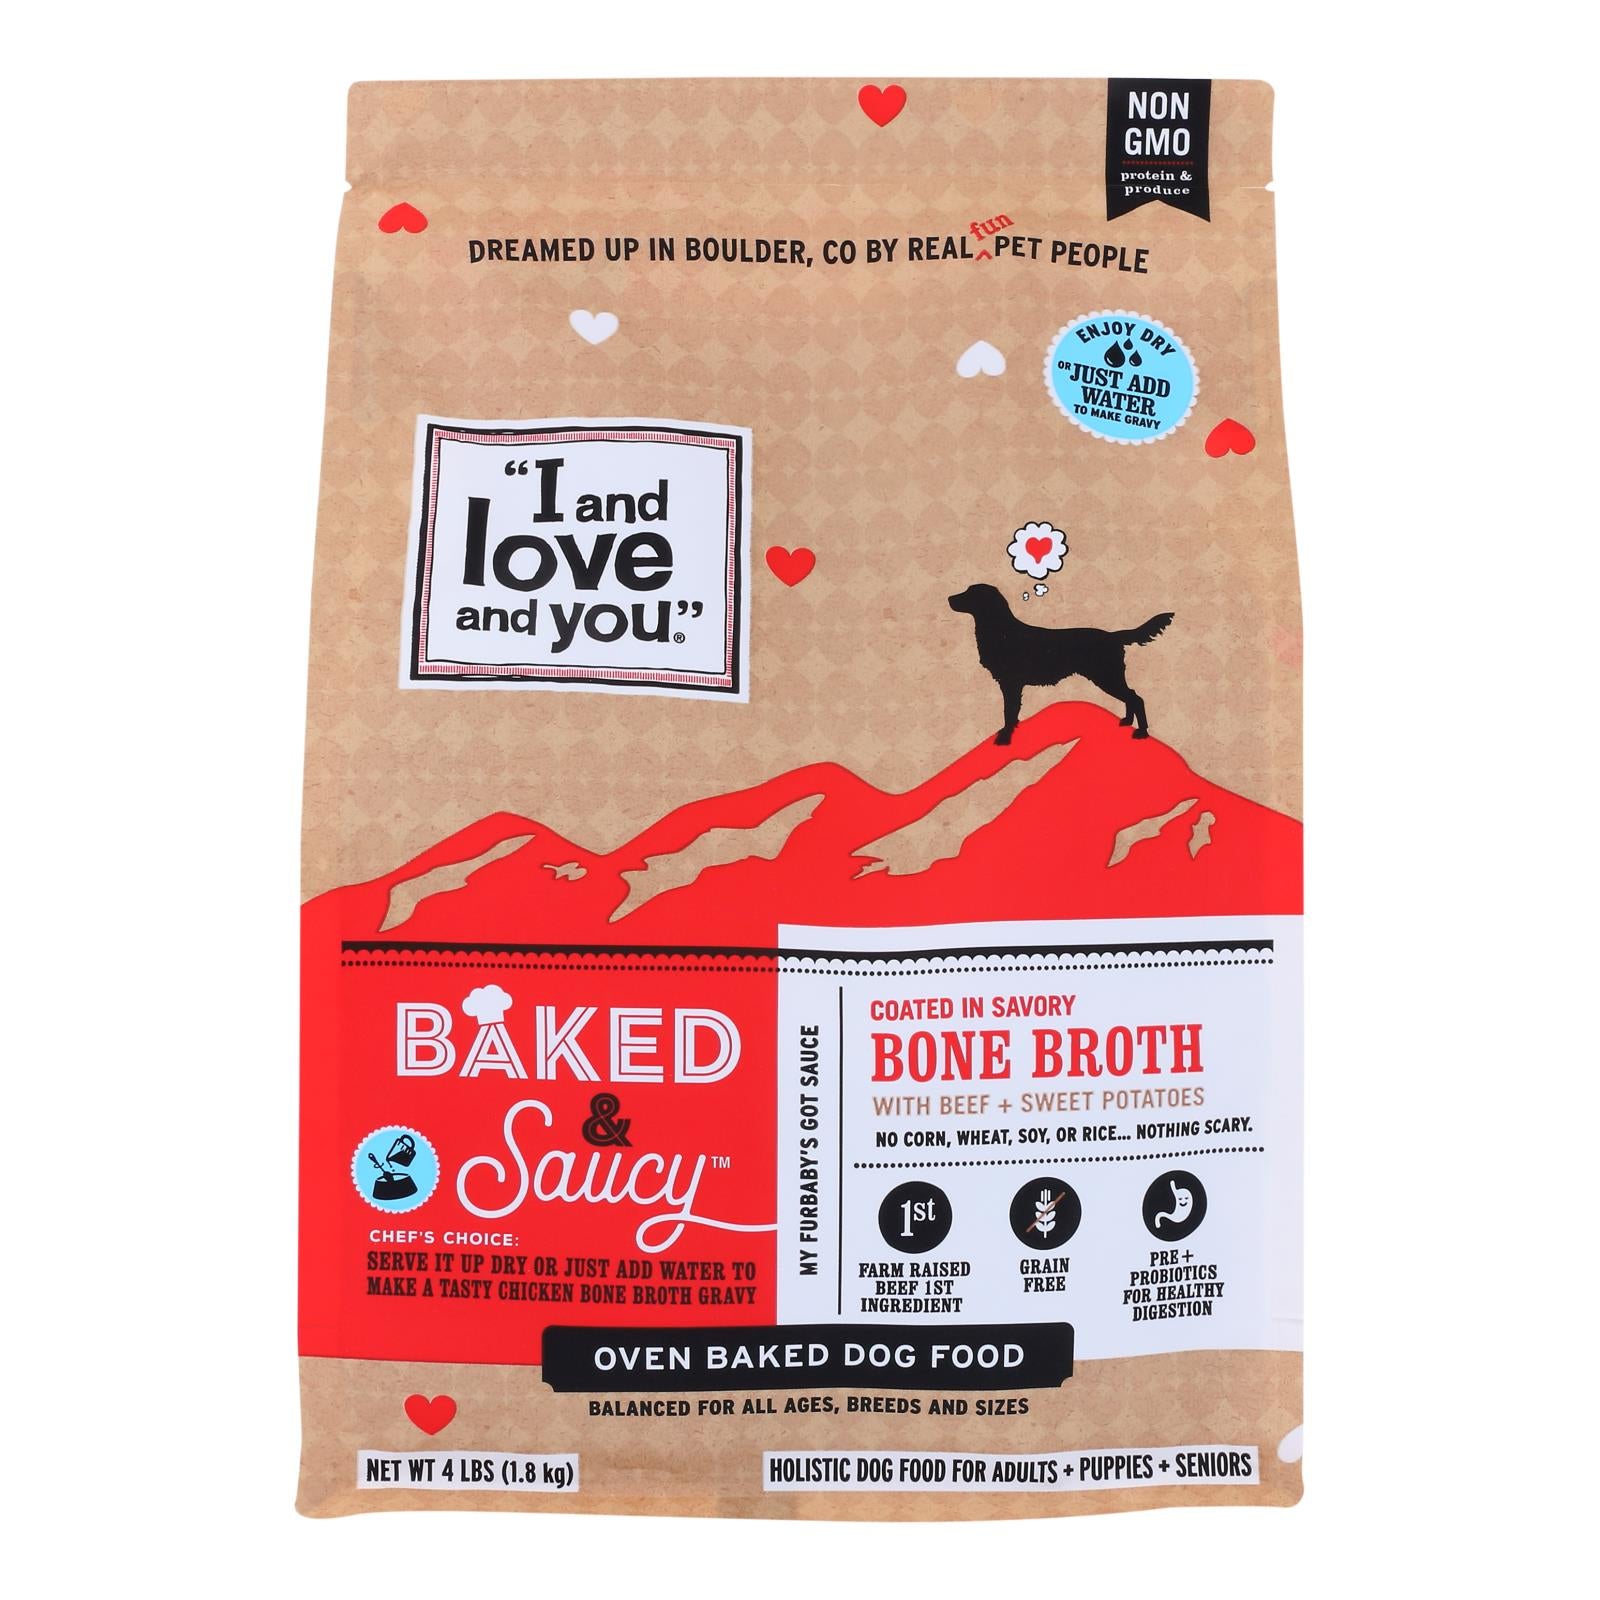 I And Love And You - Dog Food Baked Saucy Beef - Case of 6 - 4 LB